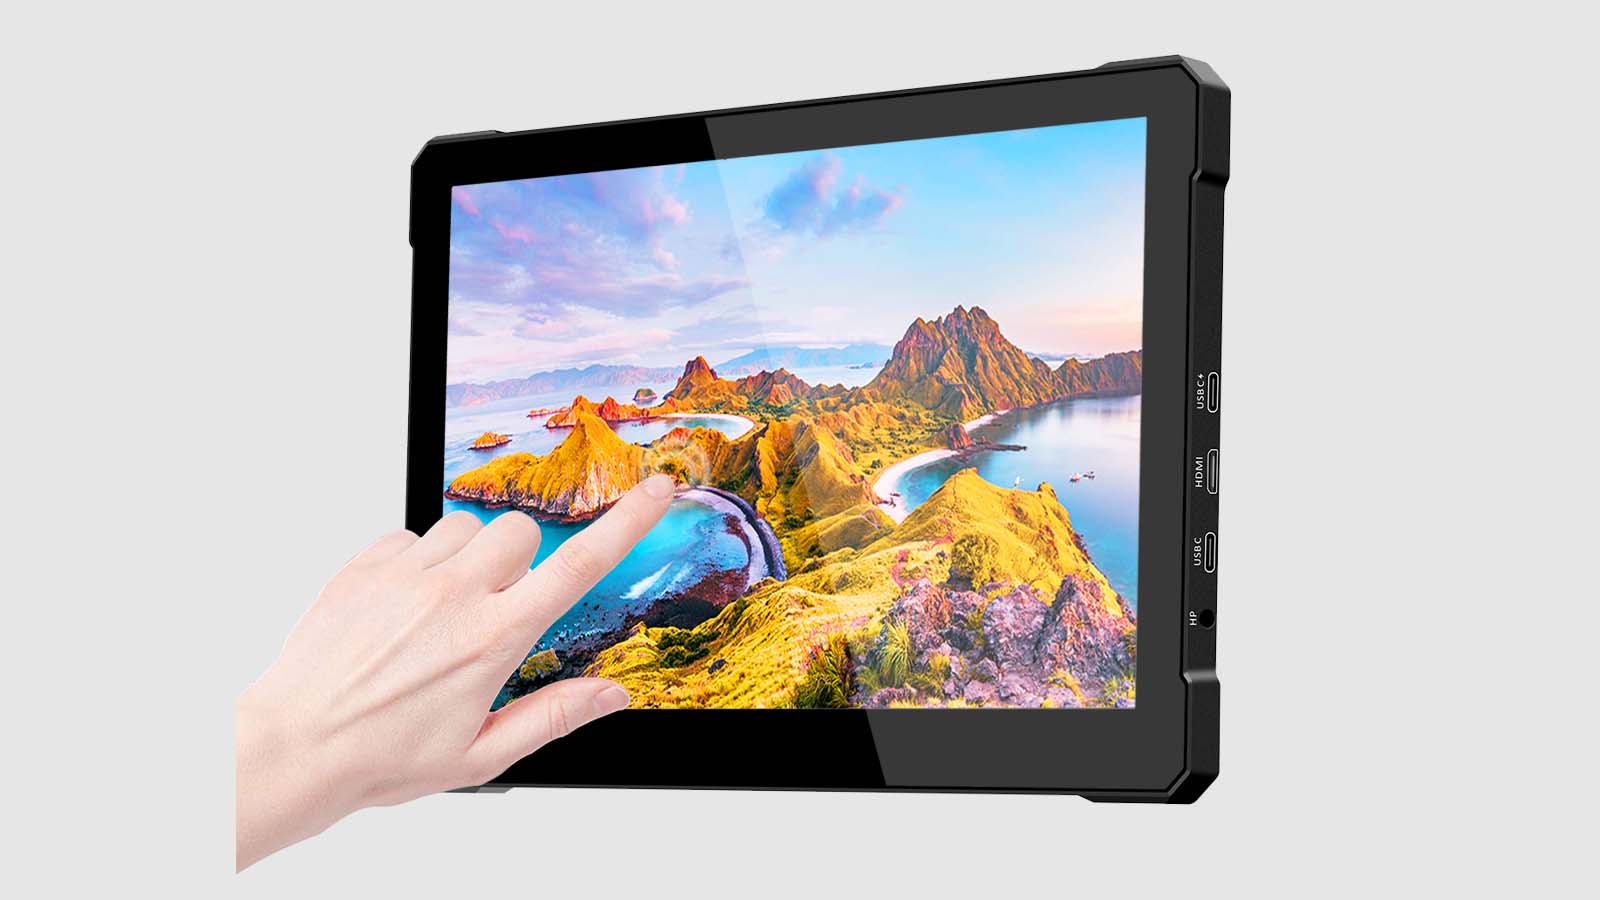 Magedok 10.1 Inch Portable Touch Monitor